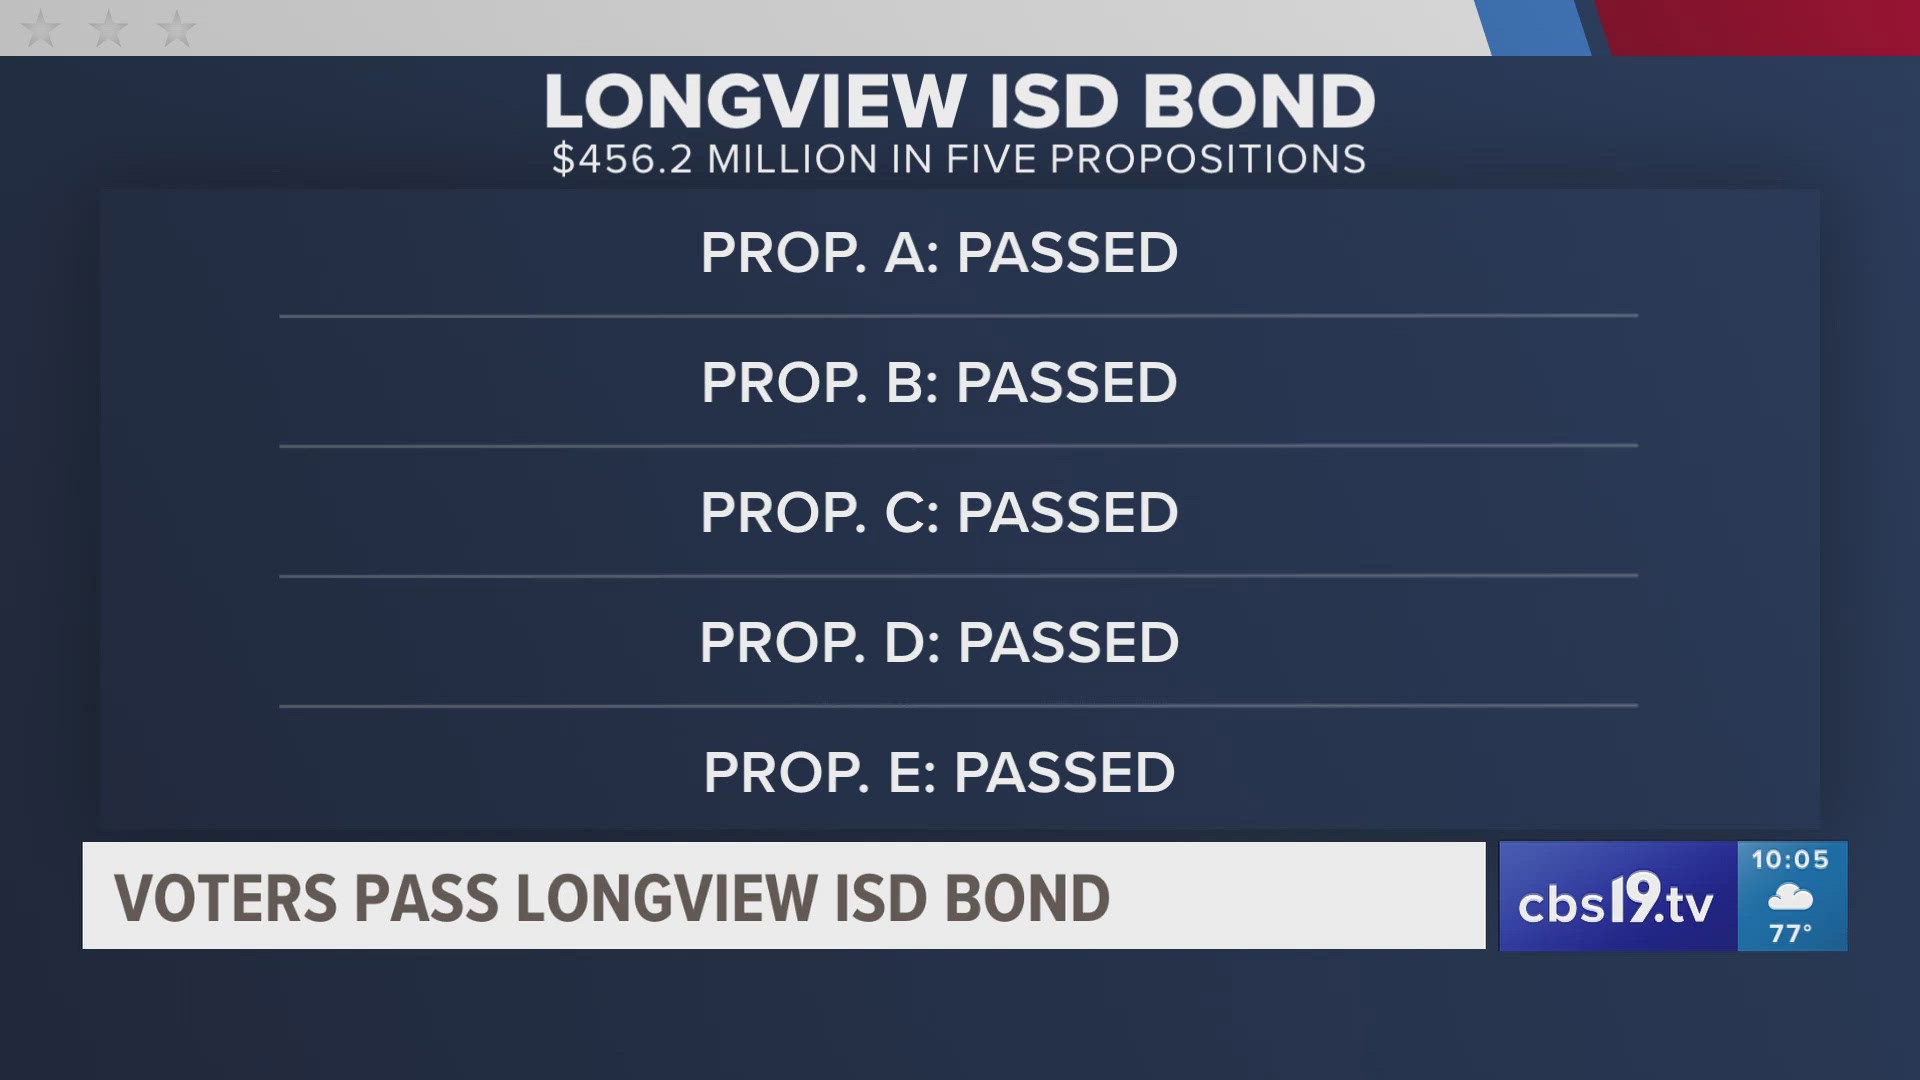 Longview ISD proposed the bond across five propositions to address aging infrastructure and facilities.